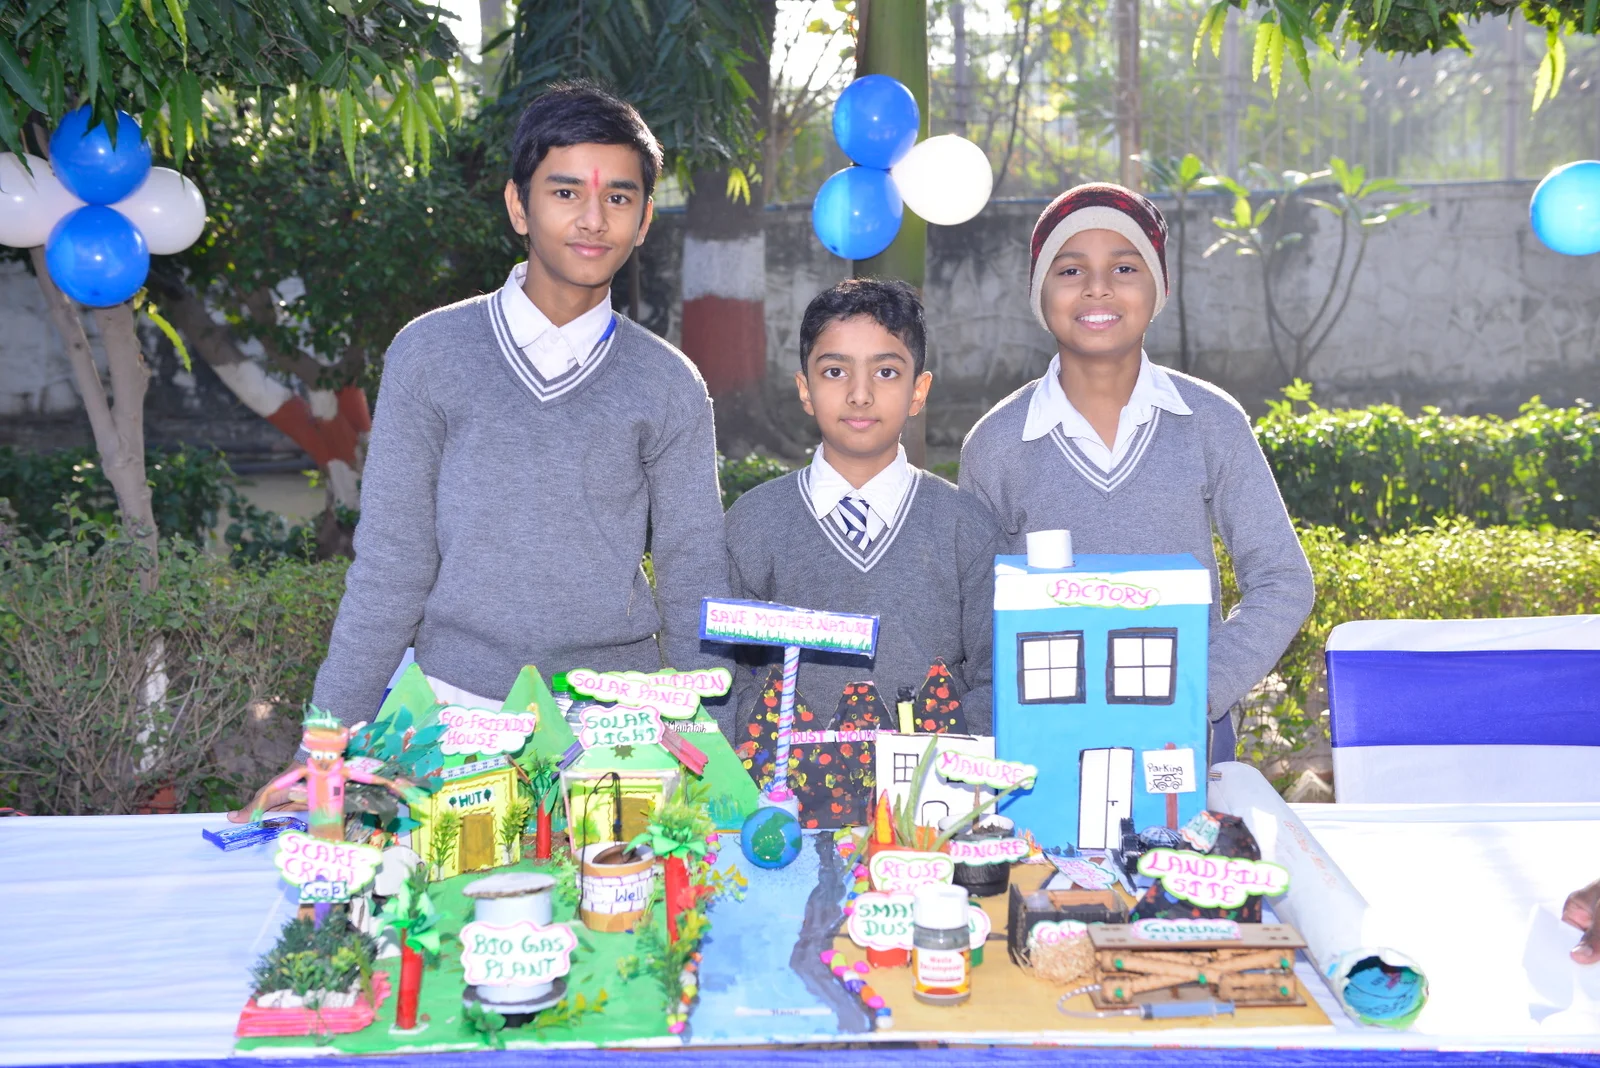 Tata Power Reinforces Commitment Towards Energy Efficiency this National Energy Conservation Day; Company's Club Enerji  ‘Urja Mela’ Brings Together More Than 500 Students from 100+ Schools from 8 States